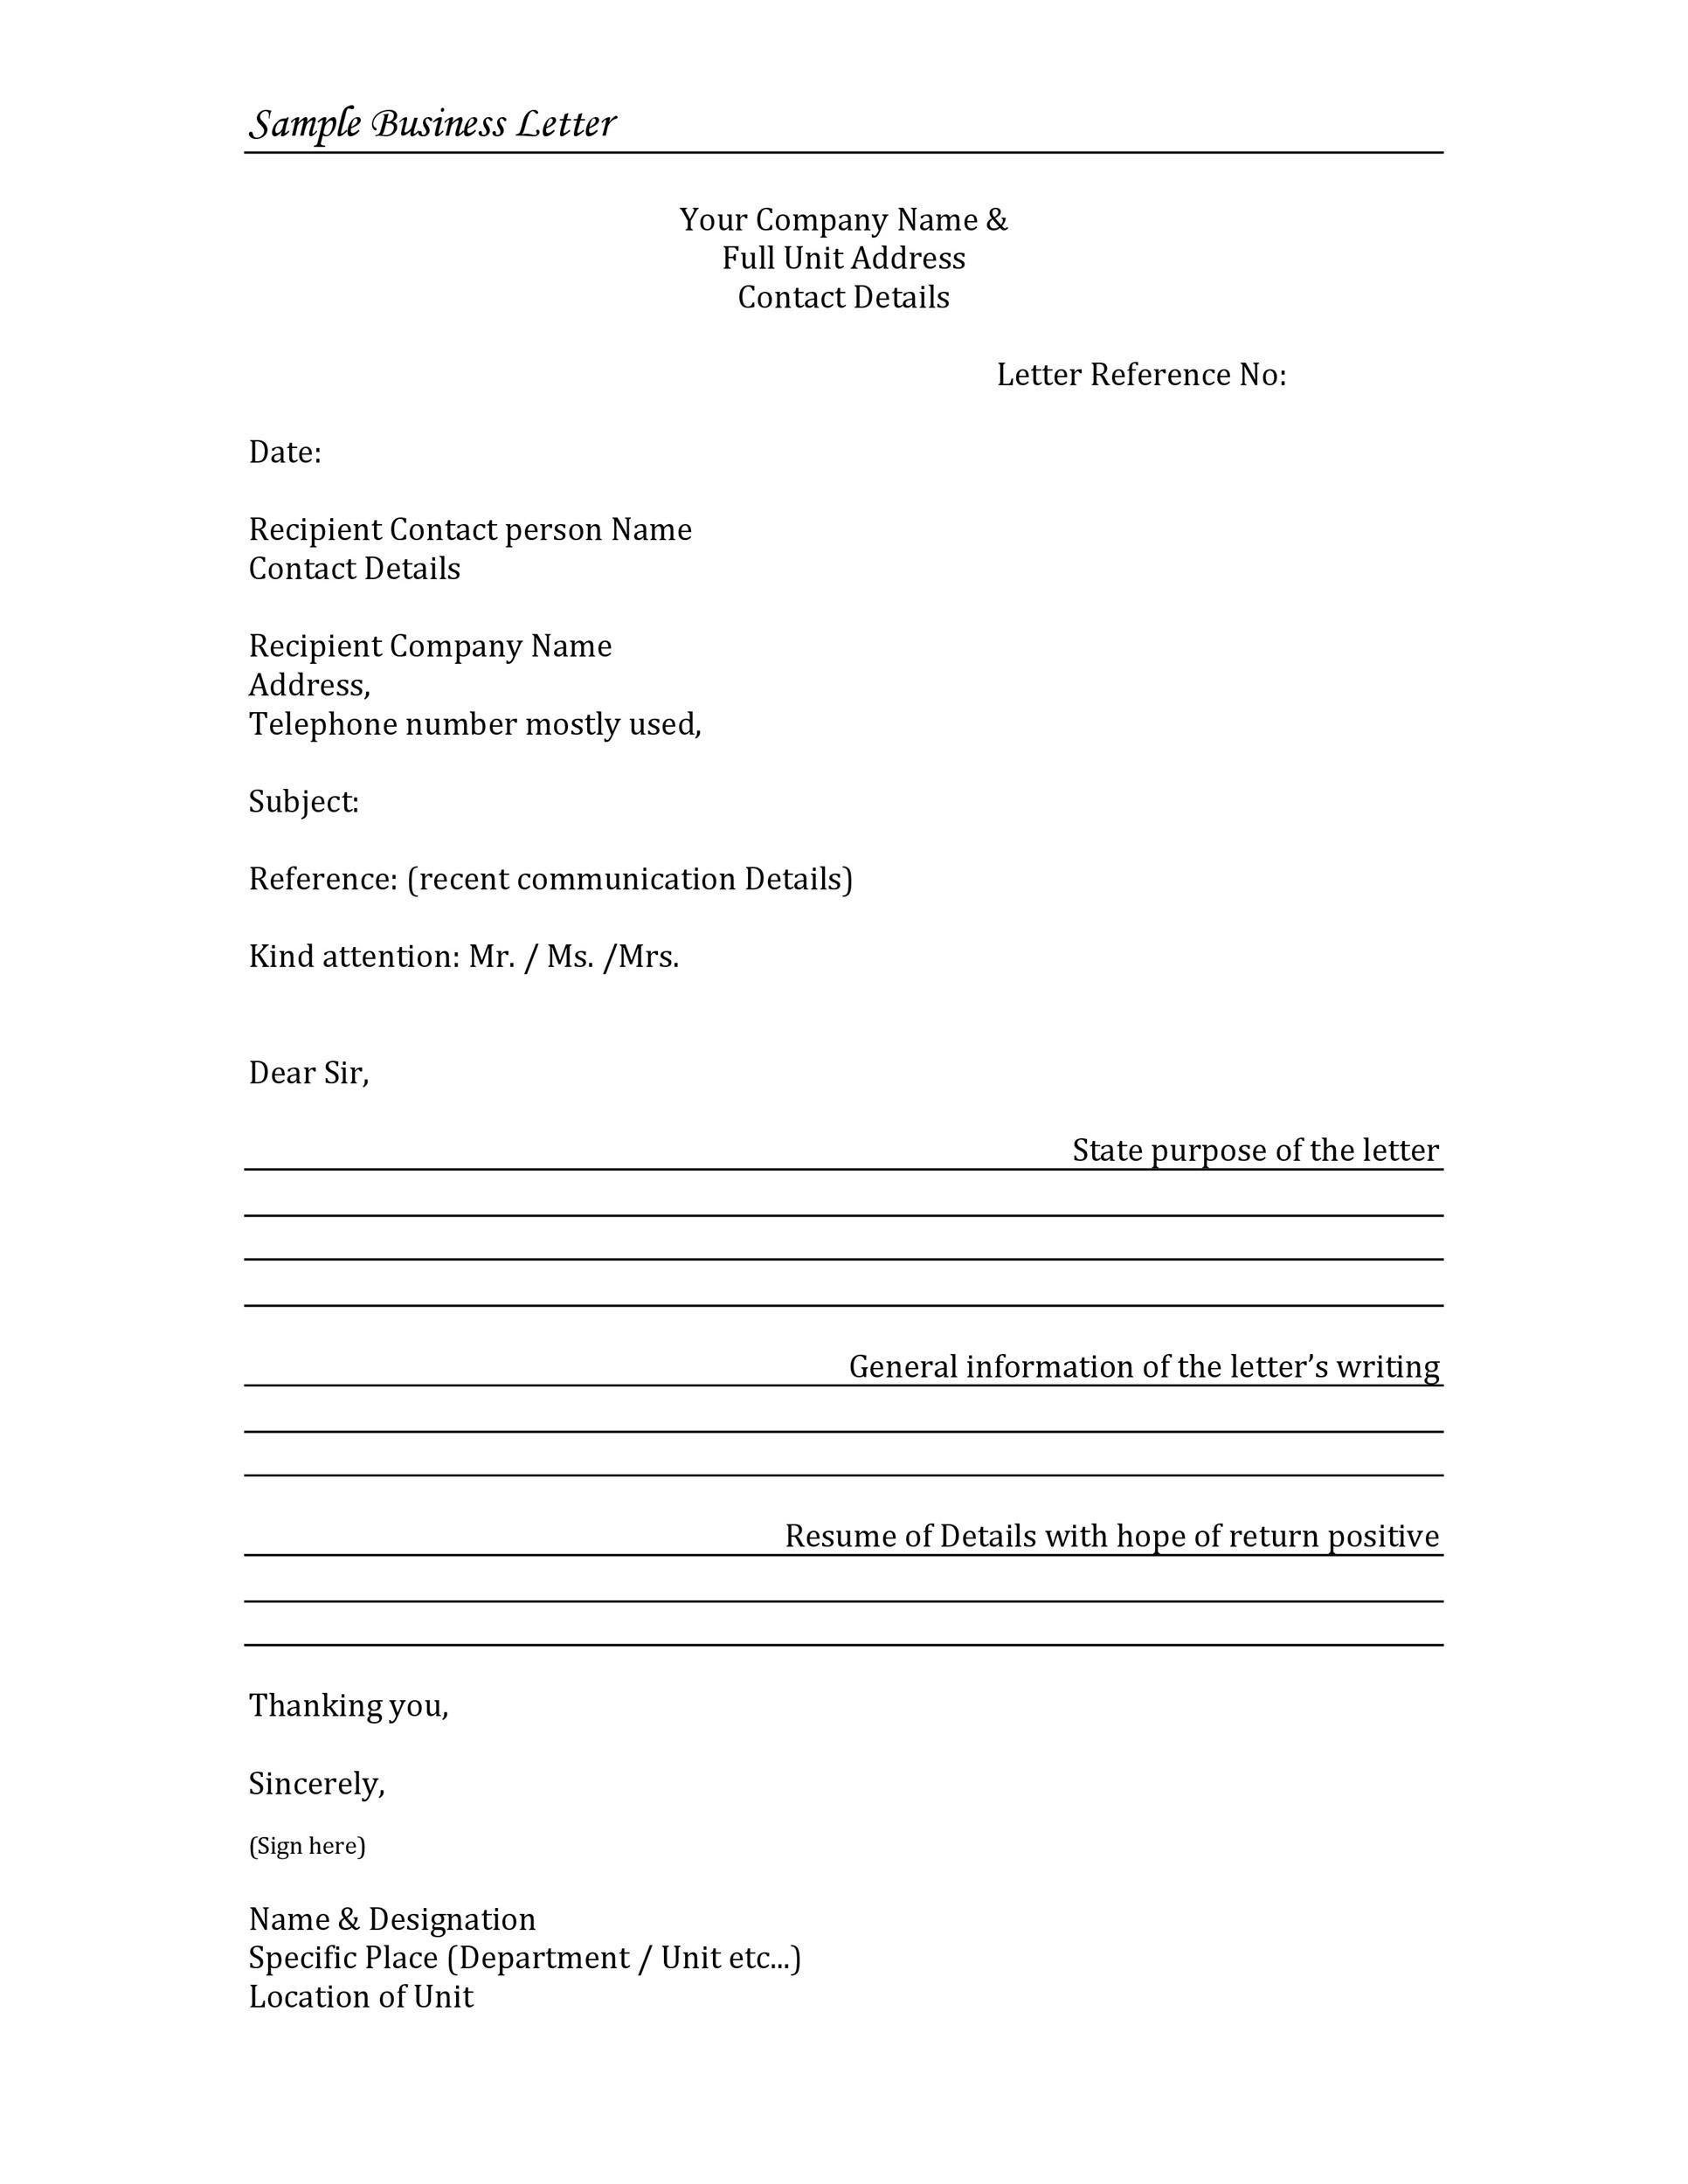 35 Formal Business Letter Format Templates Examples ᐅ Templatelab